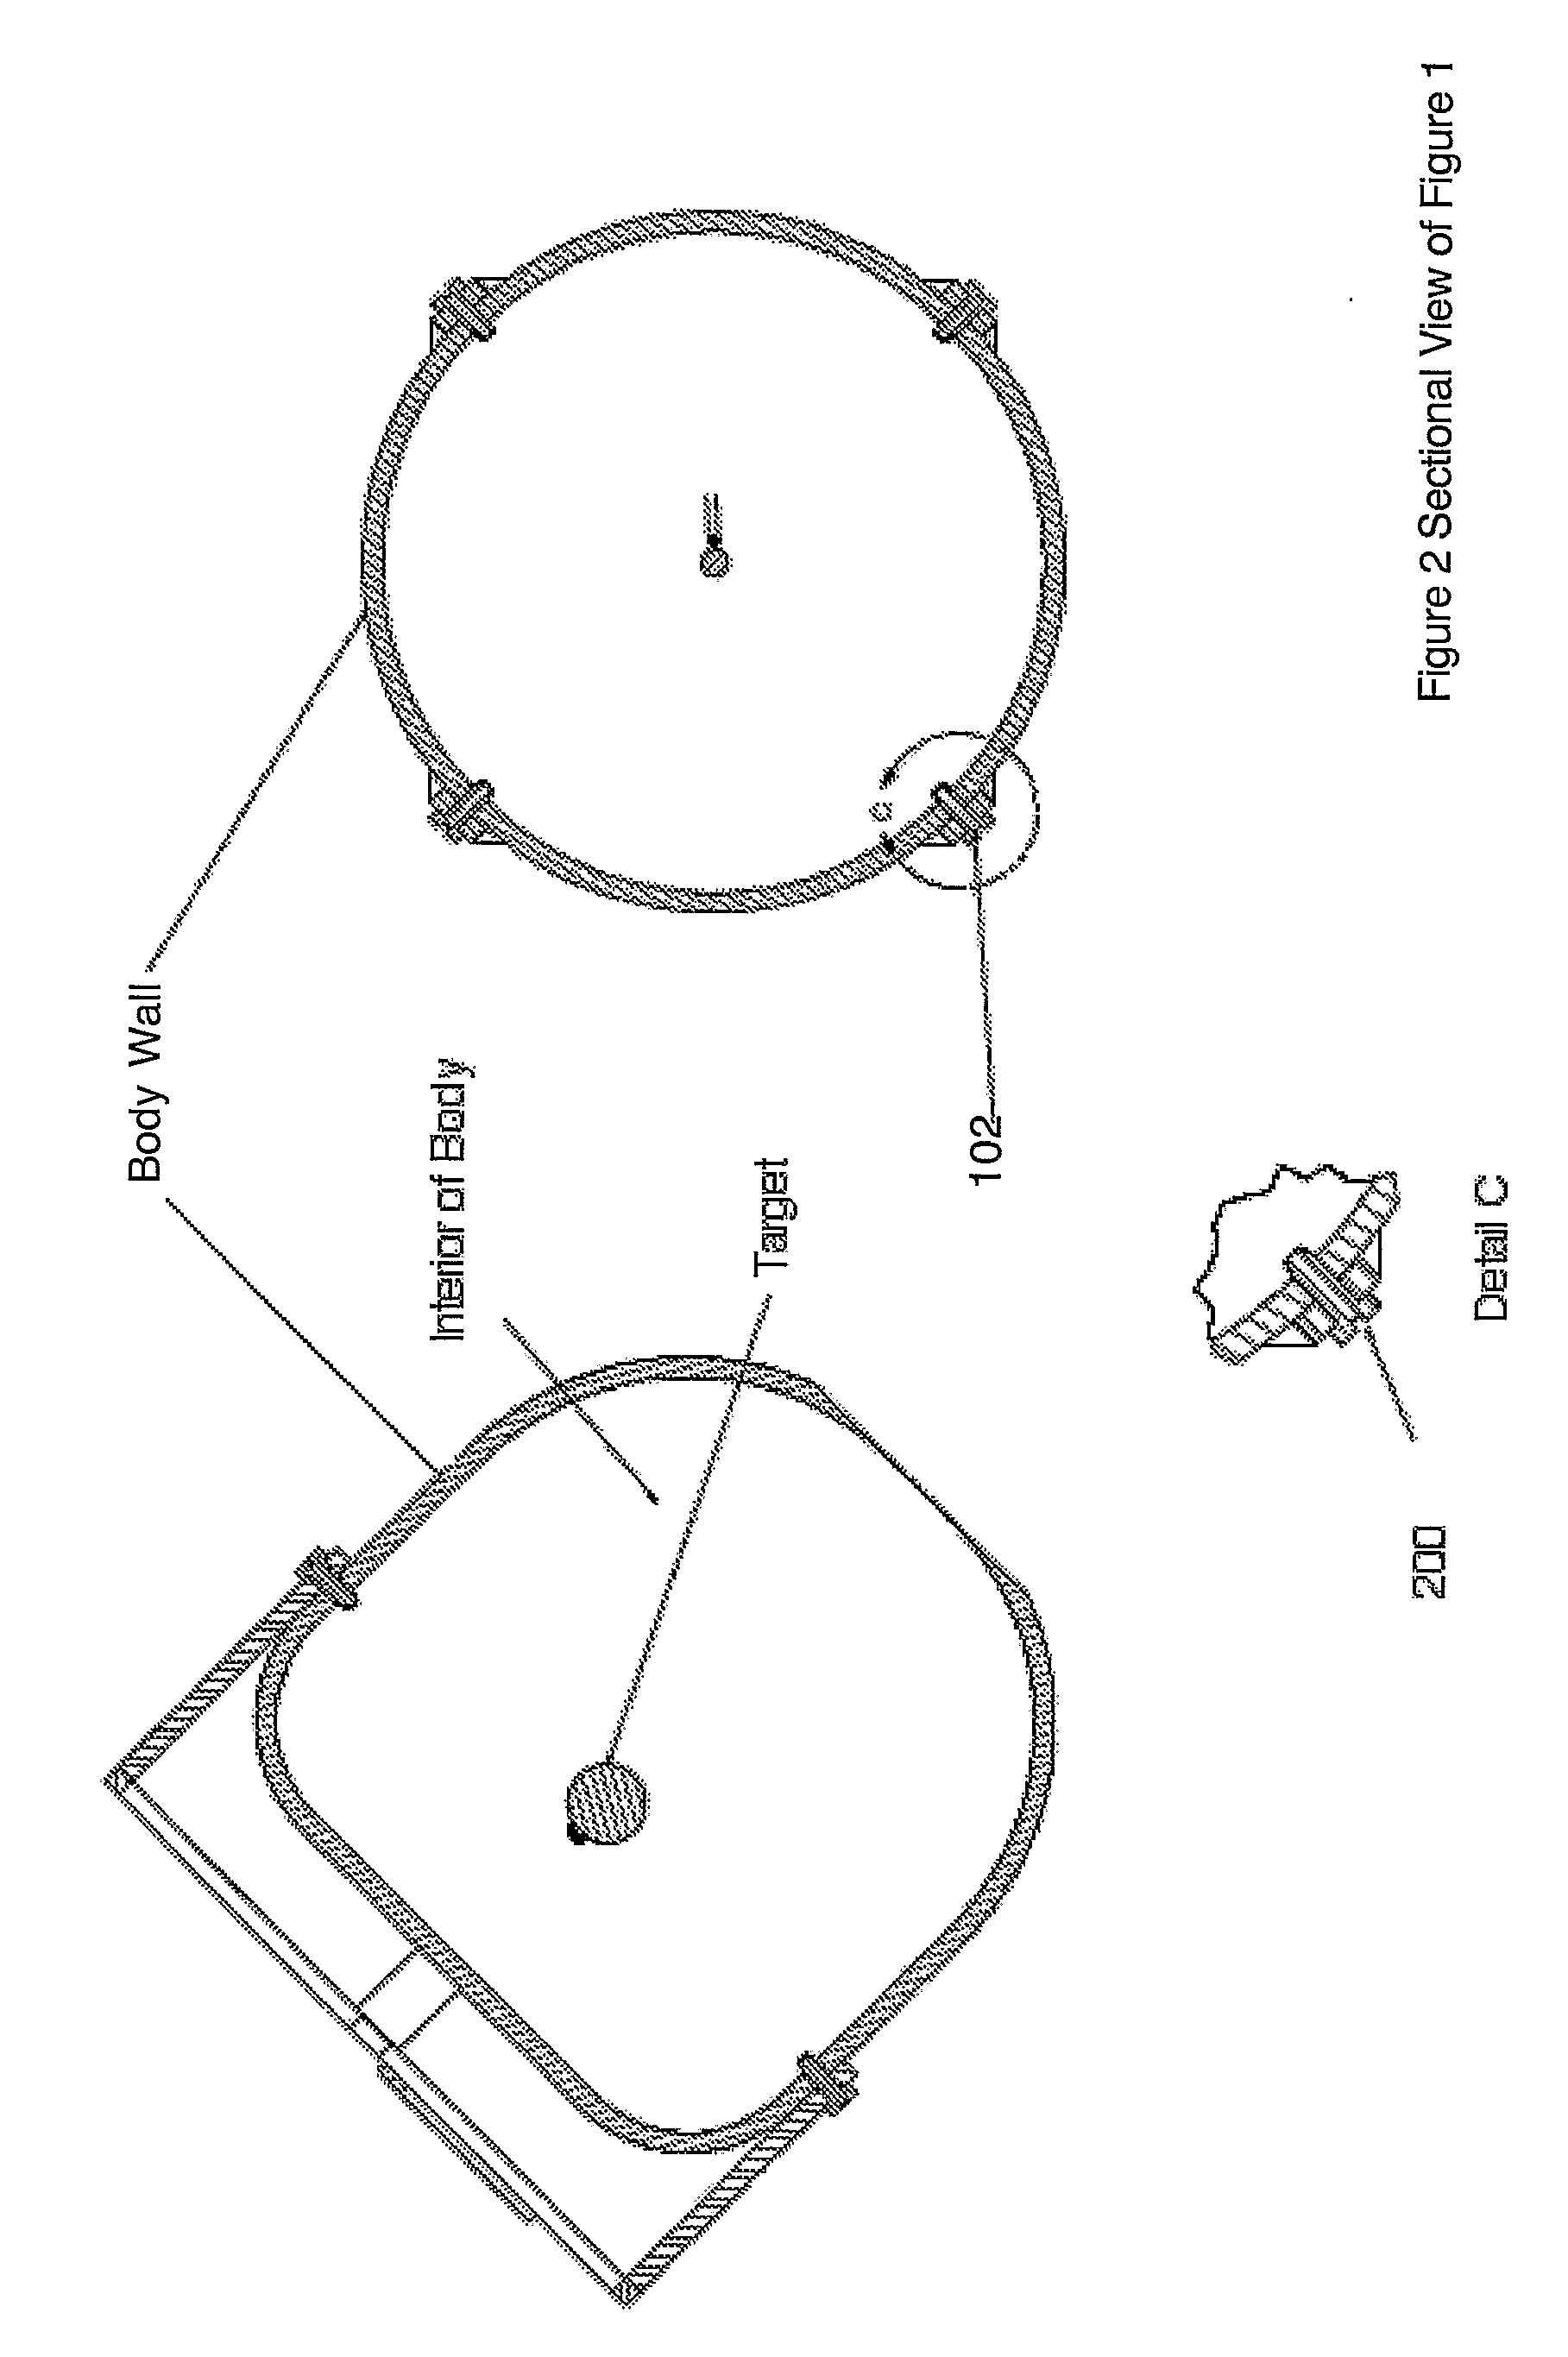 Percutaneous medical devices and methods